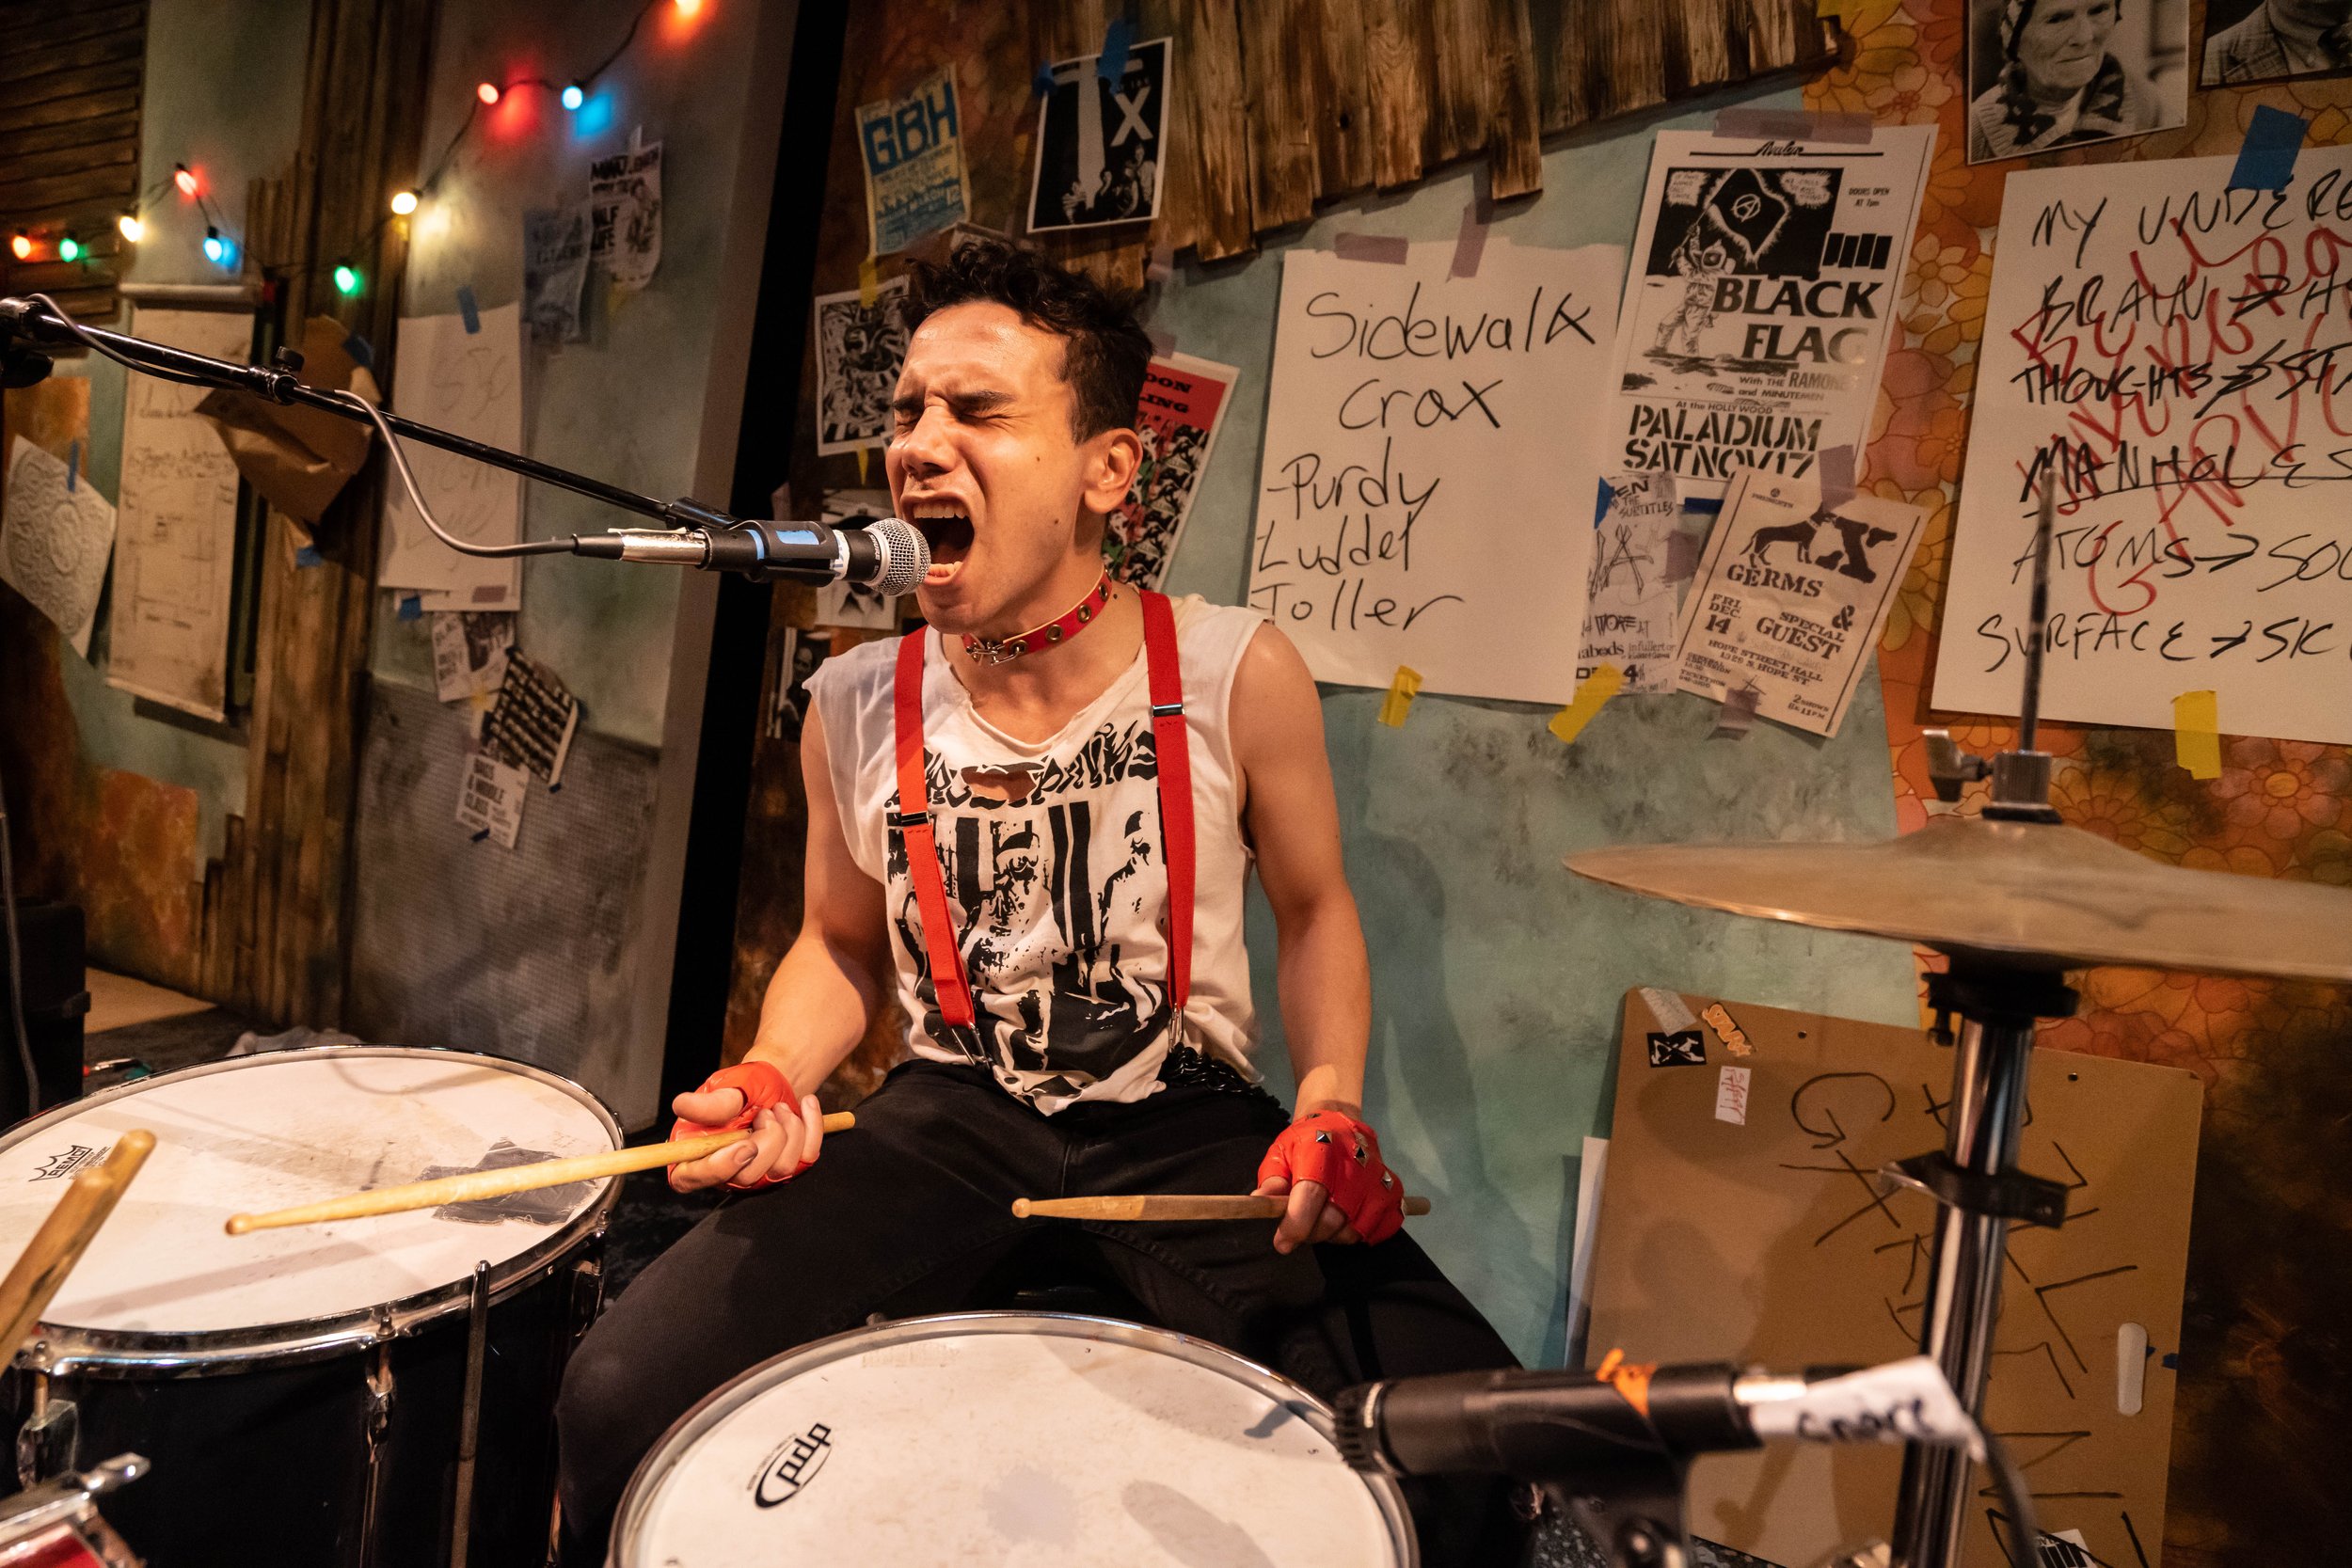   ADOBE PUNK: THE CONCERT   March 15-17 at FRIDA KAHLO THEATER - Los Angeles  March 22-24 at LINEAGE PERFORMING ARTS - Pasadena 